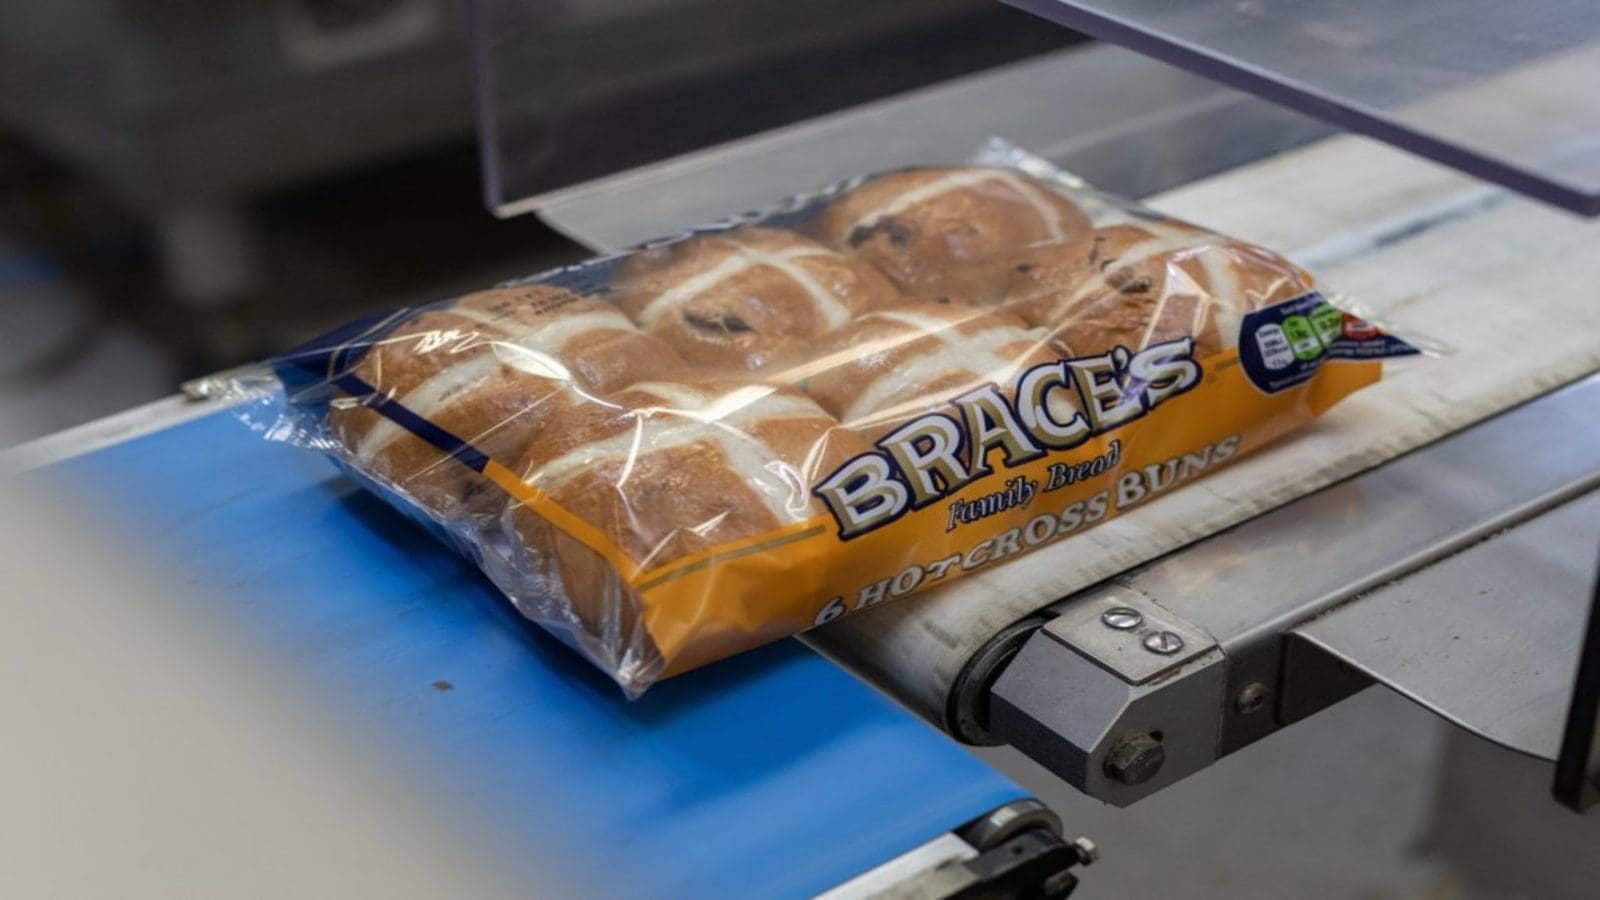 Brace’s Bakery plans US$ 4.9M investment, Greggs bakery receives expansion go-ahead